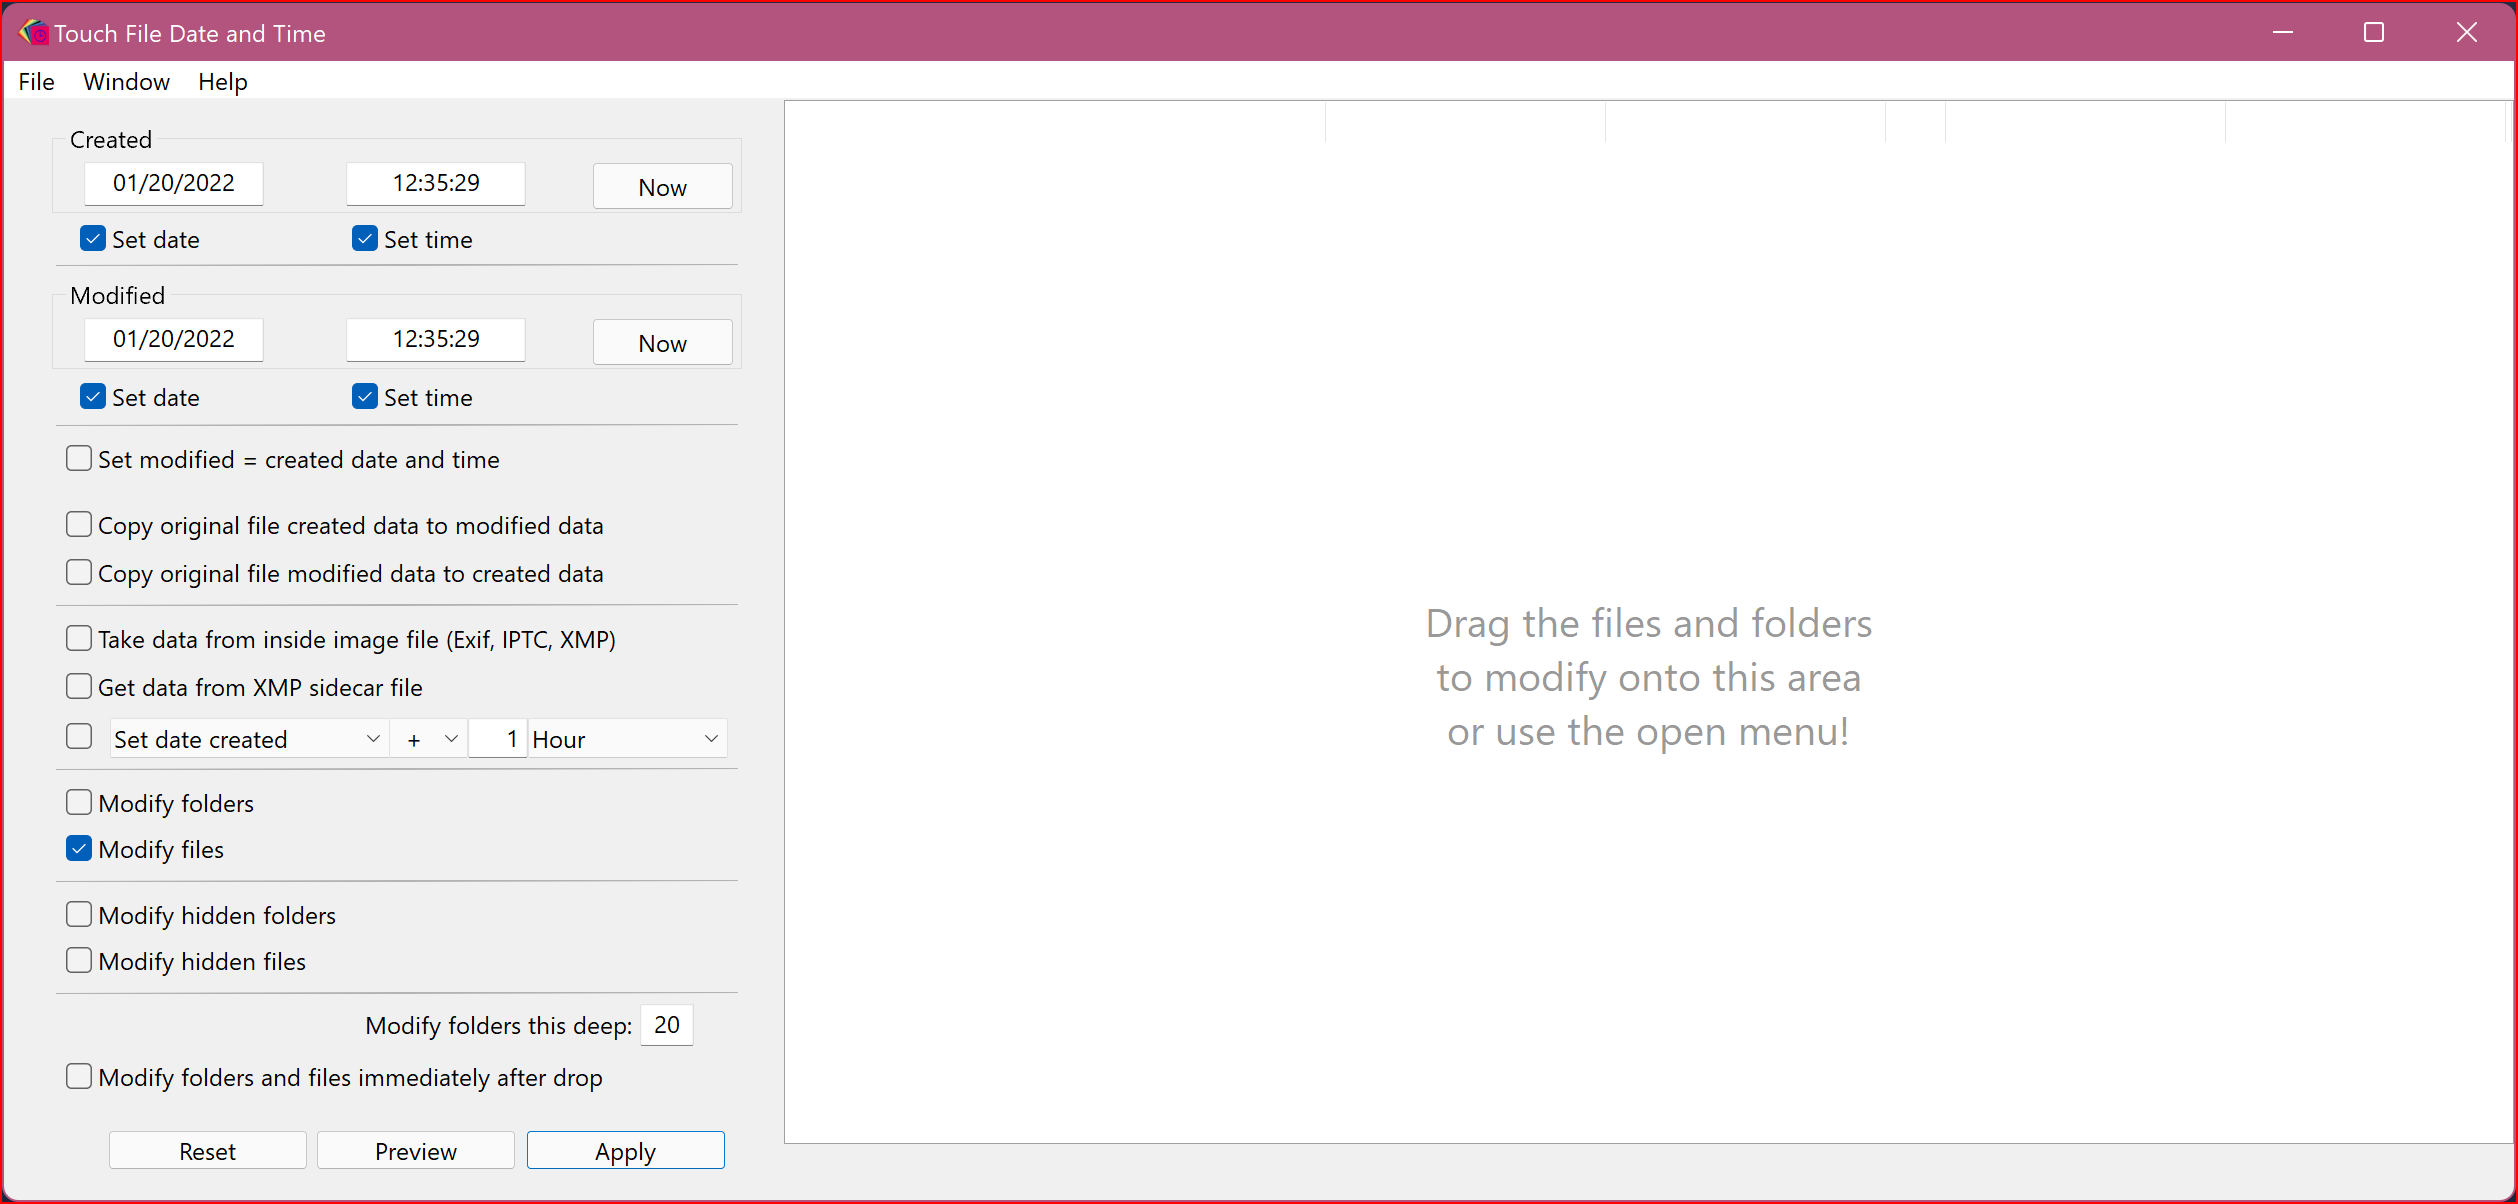 Settings (left) and files part (right) of the app's window